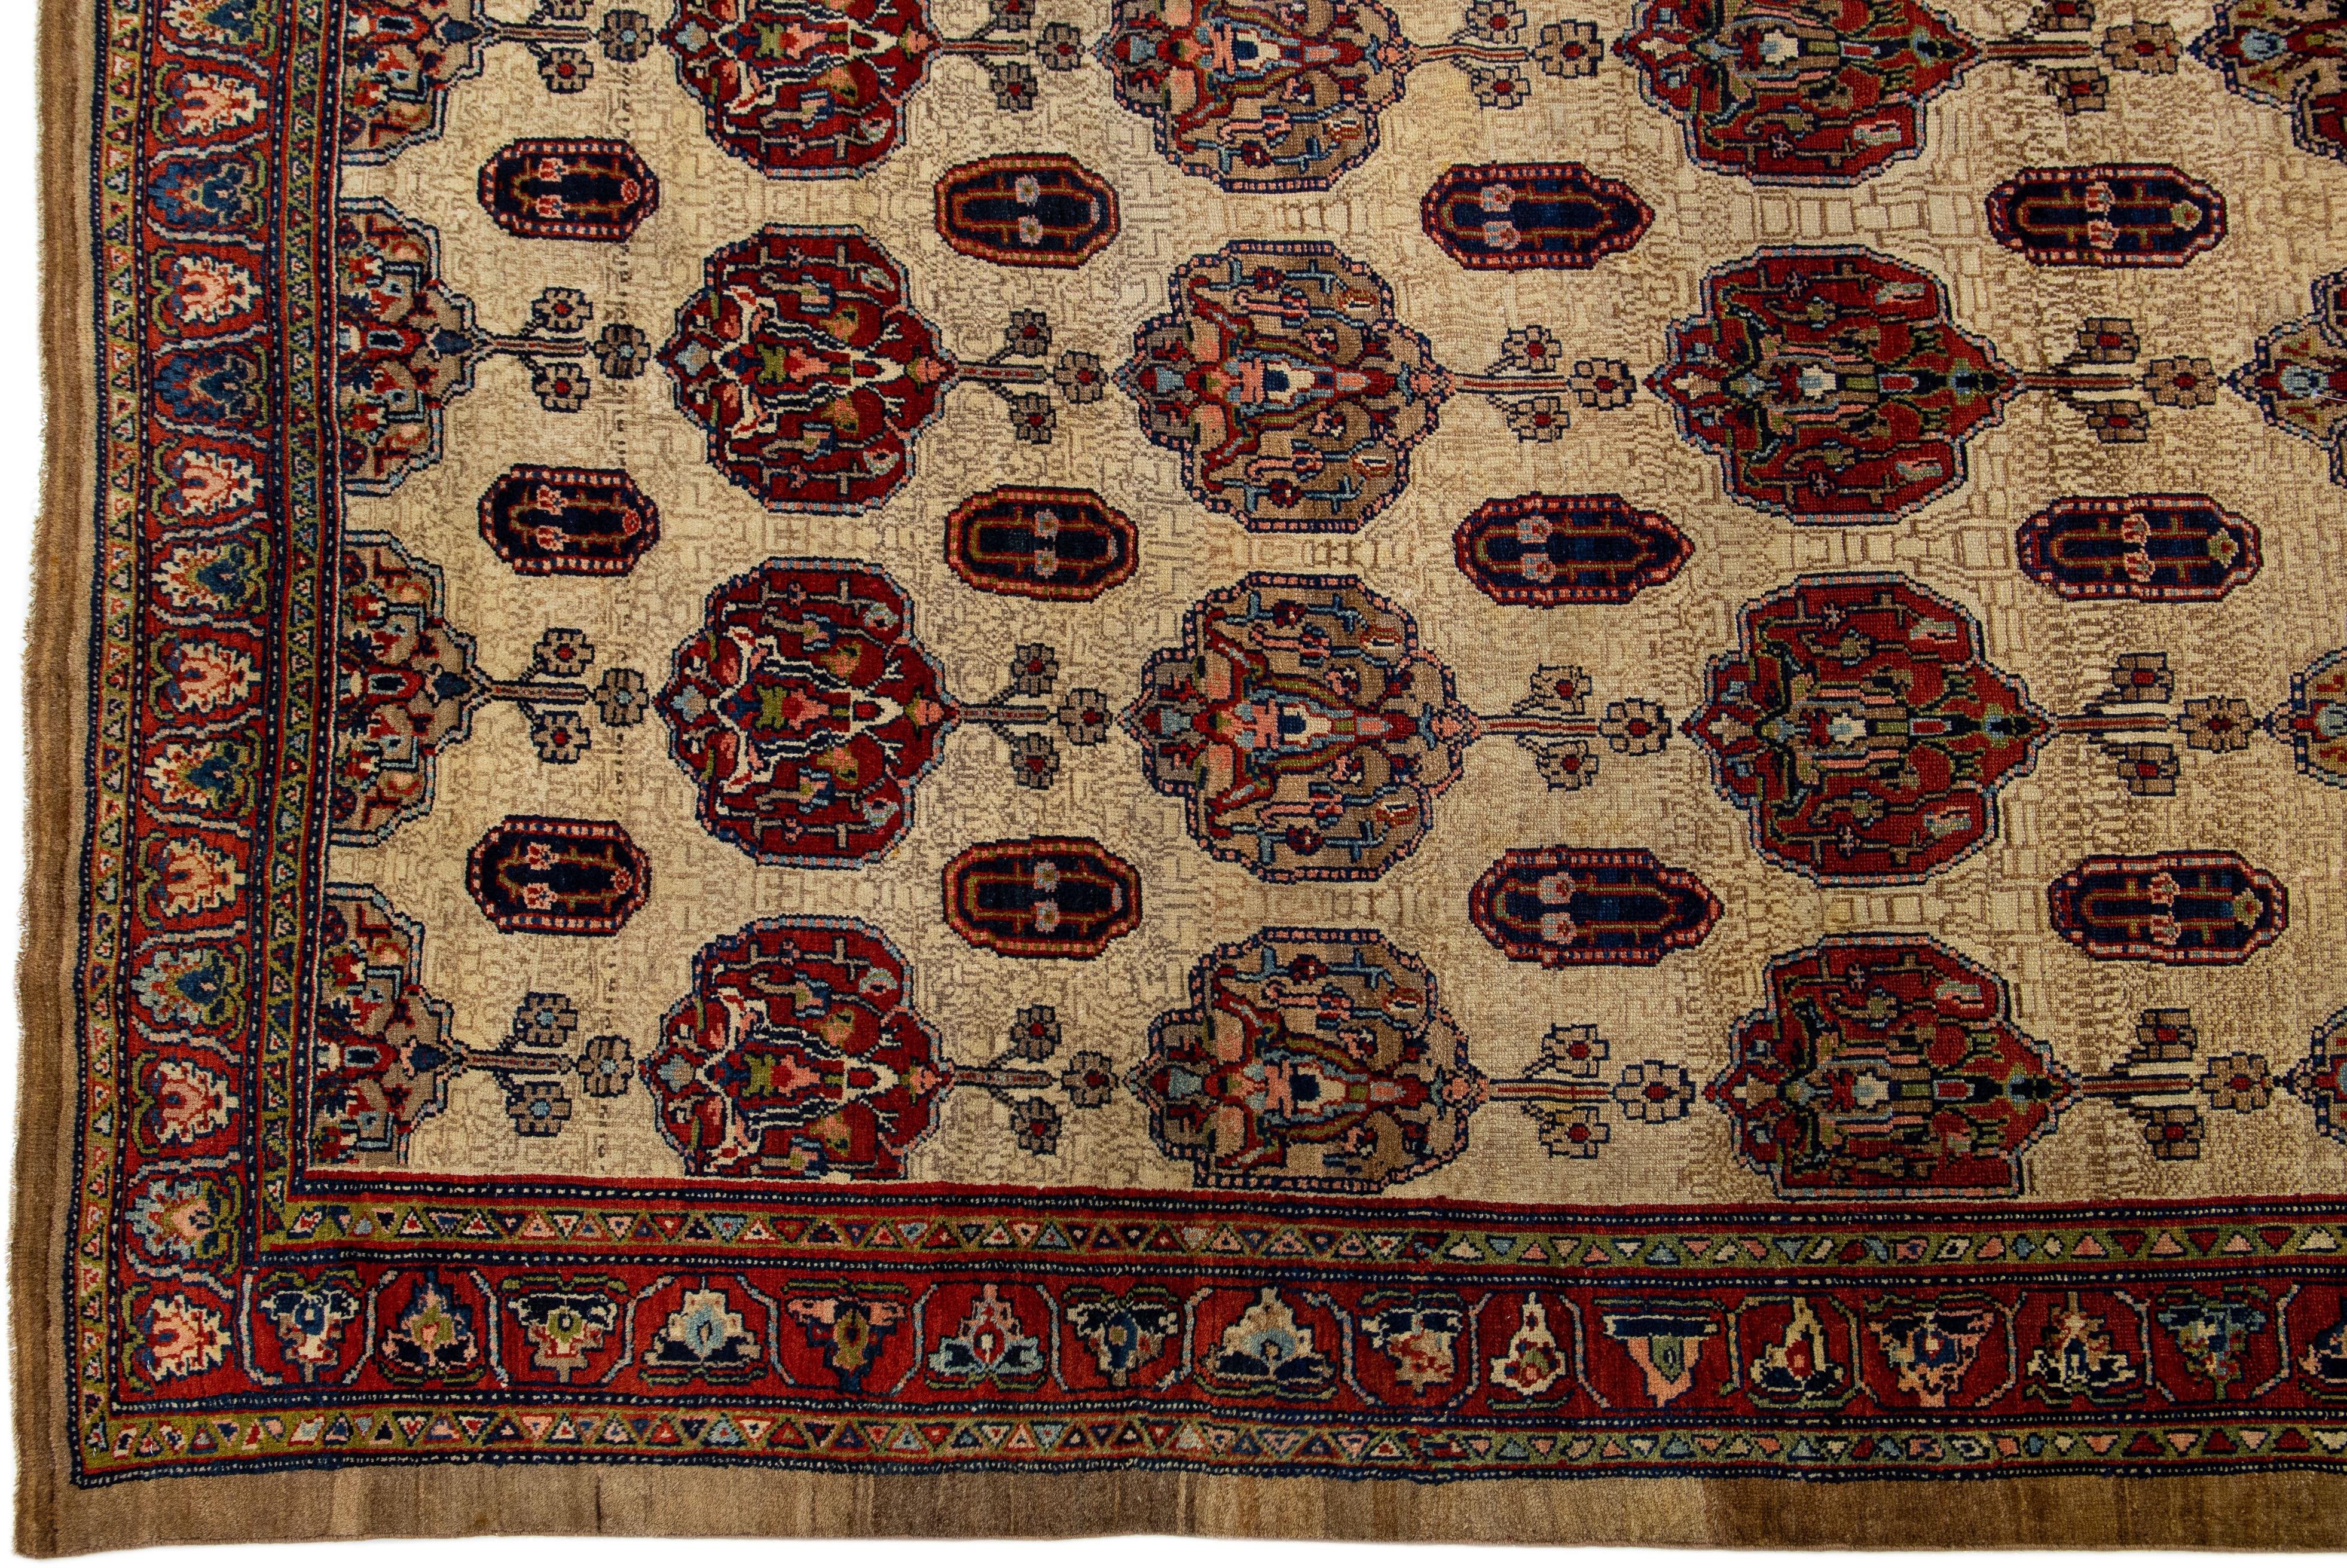 Antique Persian Serab hand-knotted wool rug with a brown color field. This piece has rust and blue accents in a beautiful classic palmettes motif.

This rug measures: 10'5